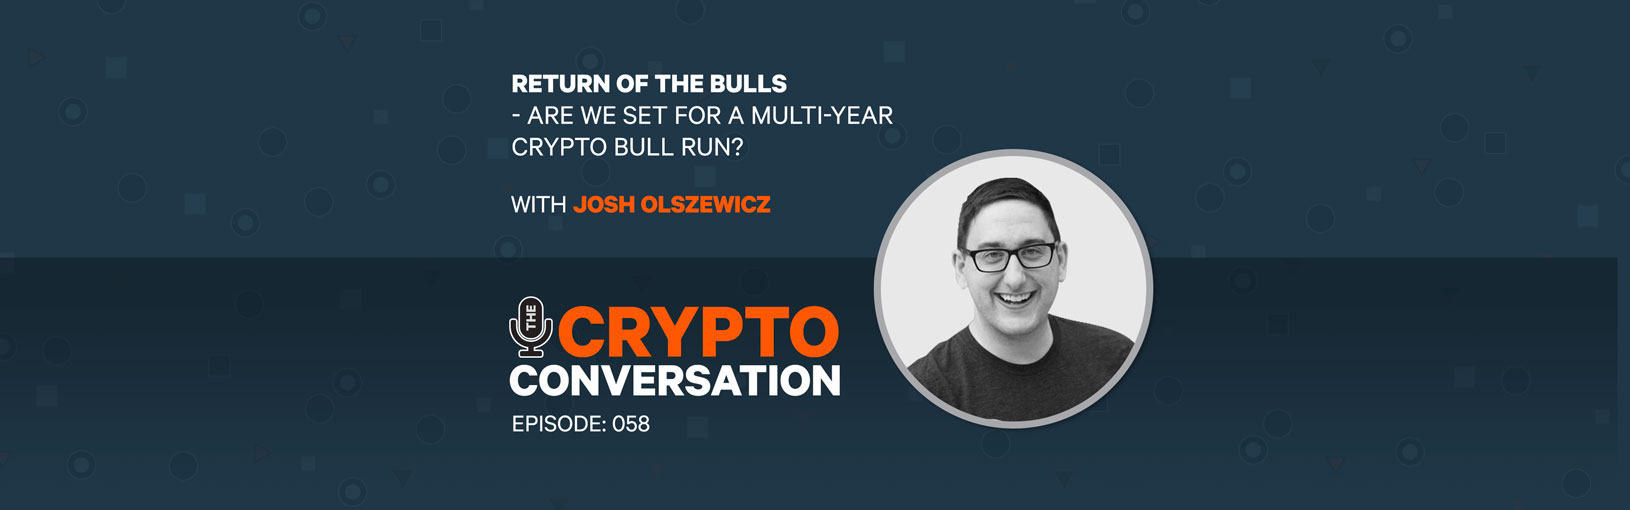 Return of the Bulls – Are we set for a multi-year crypto bull run?